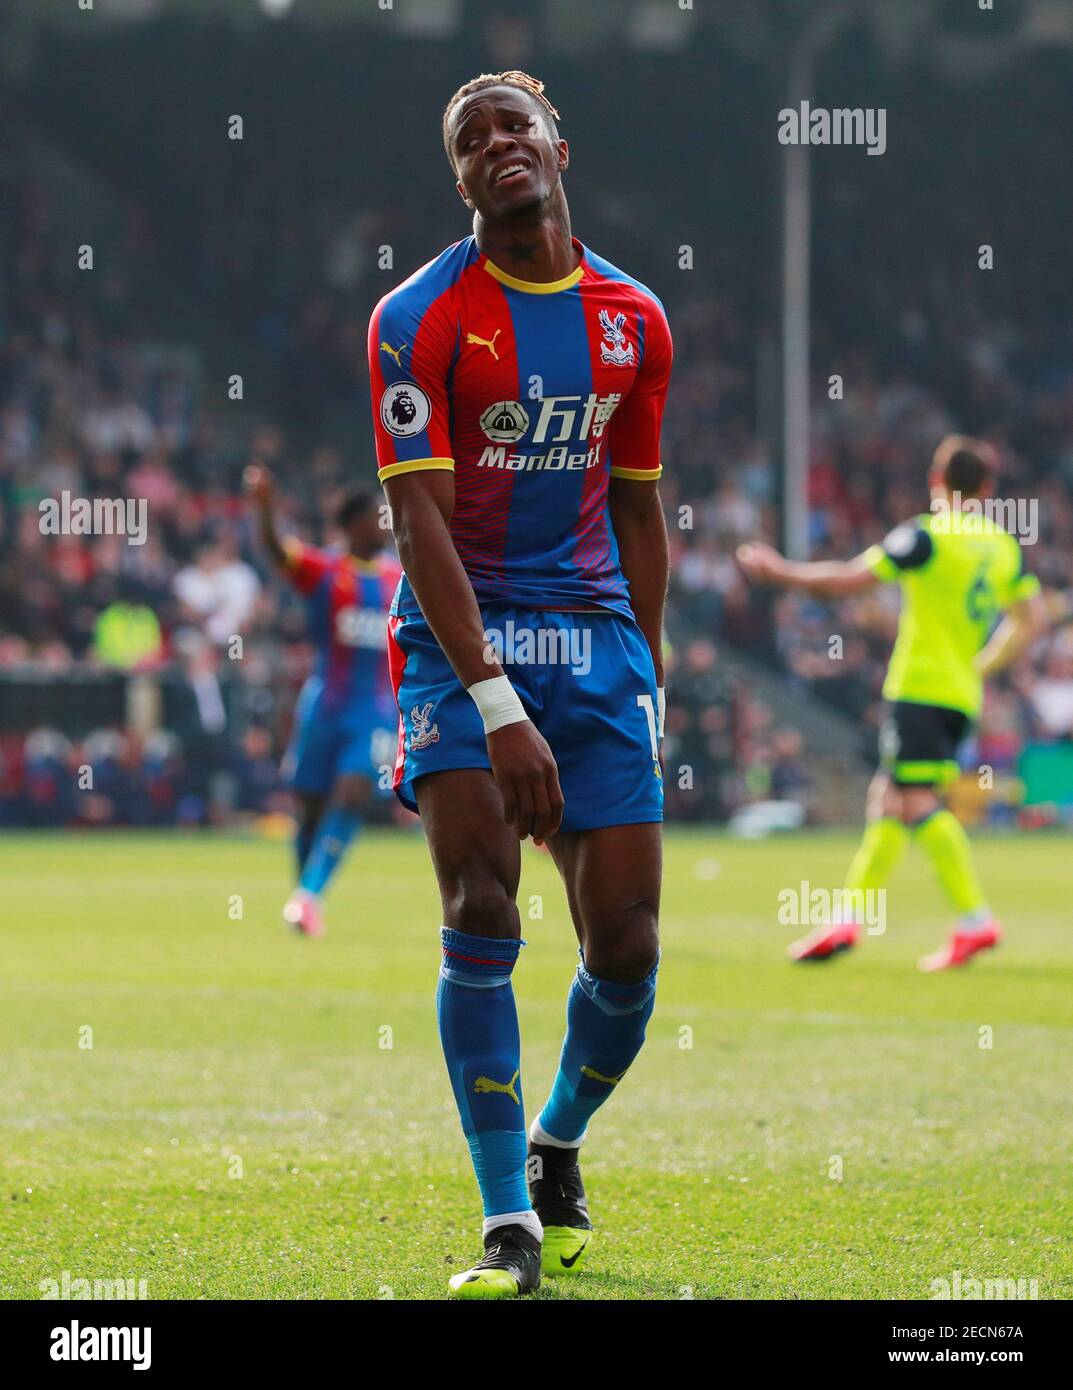 Soccer Football - Premier League - Crystal Palace v Huddersfield Town - Selhurst Park, London, Britain - March 30, 2019  Crystal Palace's Wilfried Zaha reacts during the match    Action Images via Reuters/Andrew Couldridge  EDITORIAL USE ONLY. No use with unauthorized audio, video, data, fixture lists, club/league logos or 'live' services. Online in-match use limited to 75 images, no video emulation. No use in betting, games or single club/league/player publications.  Please contact your account representative for further details. Stock Photo